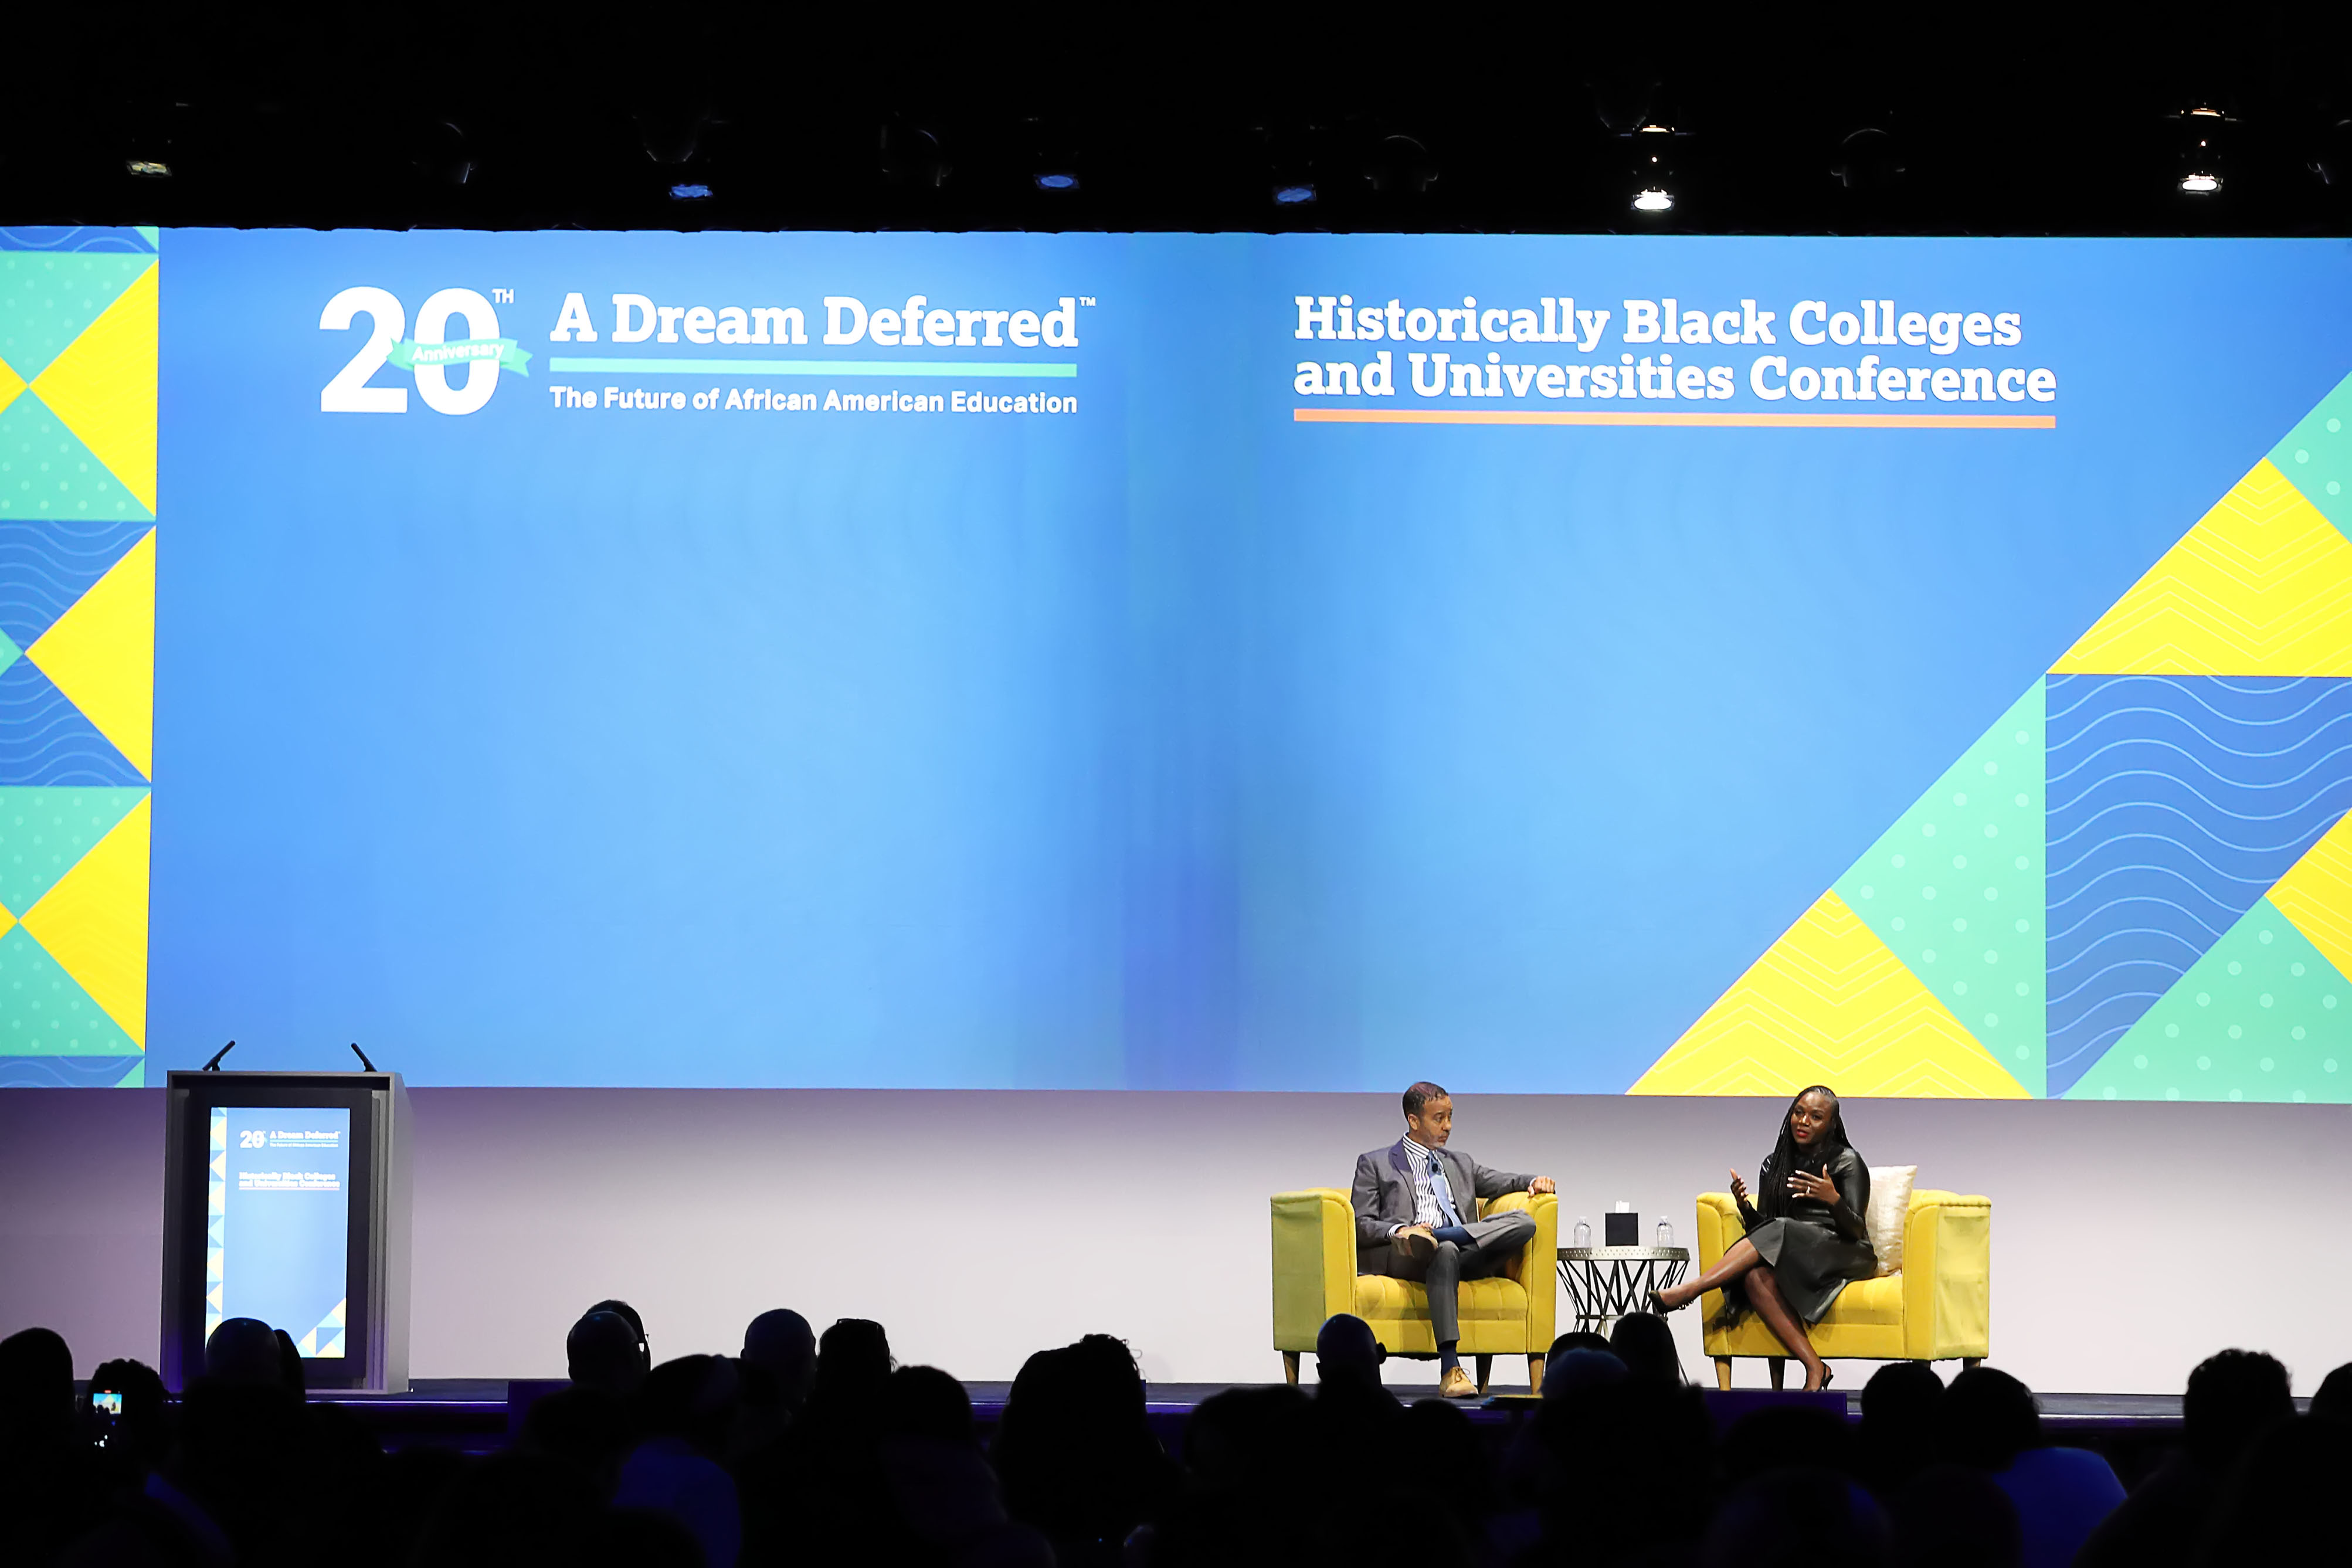 Dr. Kizzmekia Corbett-Helaire with Steve Bumbaugh at the A Dream Deferred plenary stage